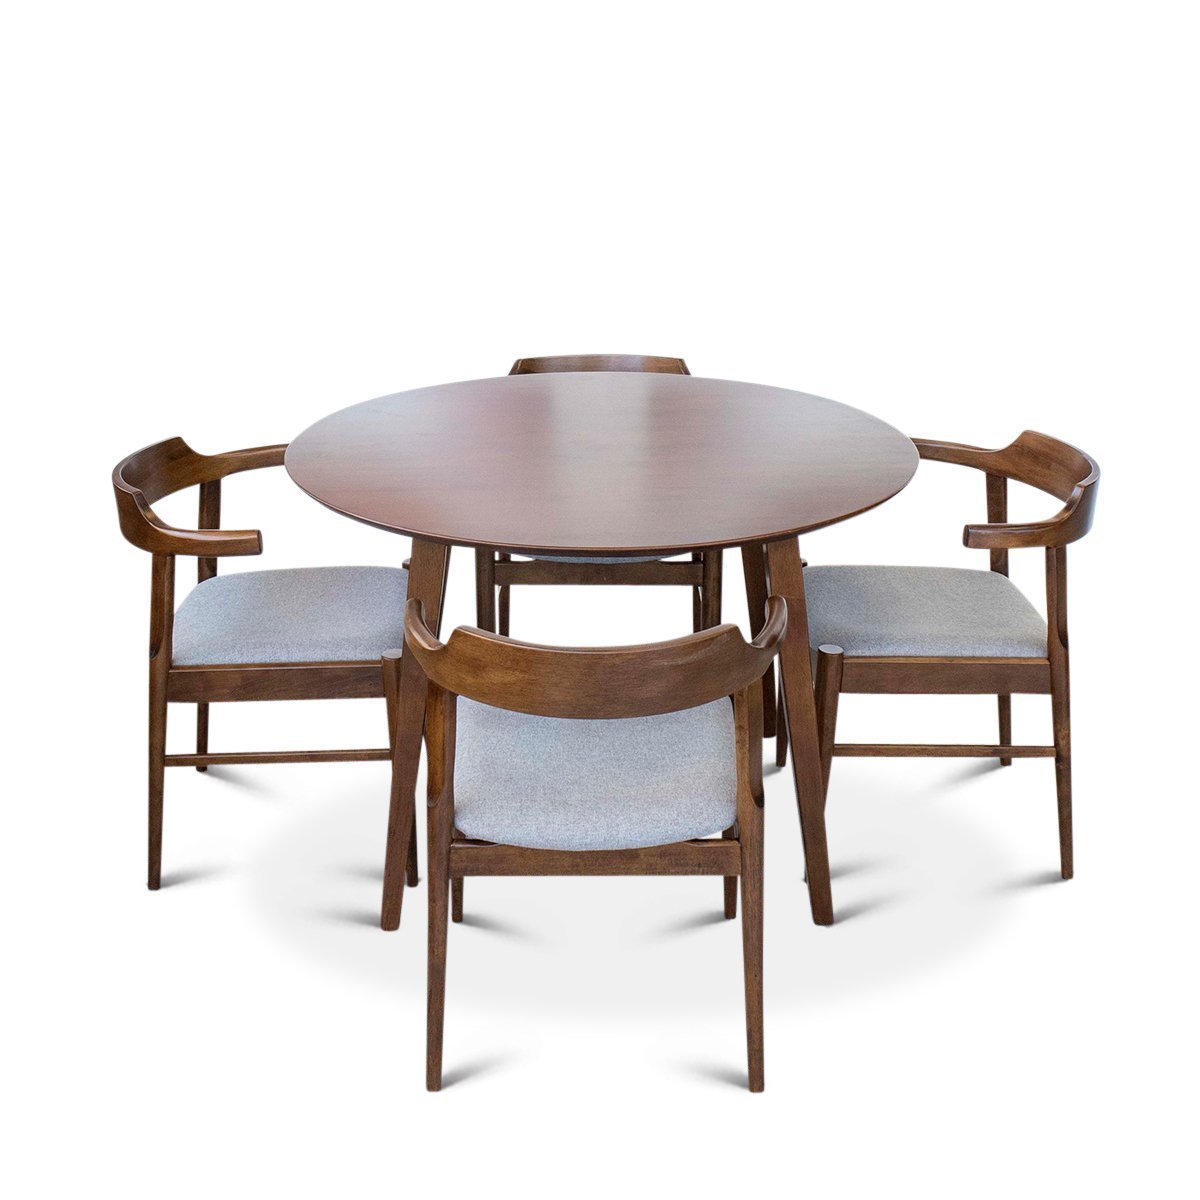 Palmer Dining set with 4 Sterling Gray Dining Chairs (Walnut) | Mid in Mod | Houston TX | Best Furniture stores in Houston